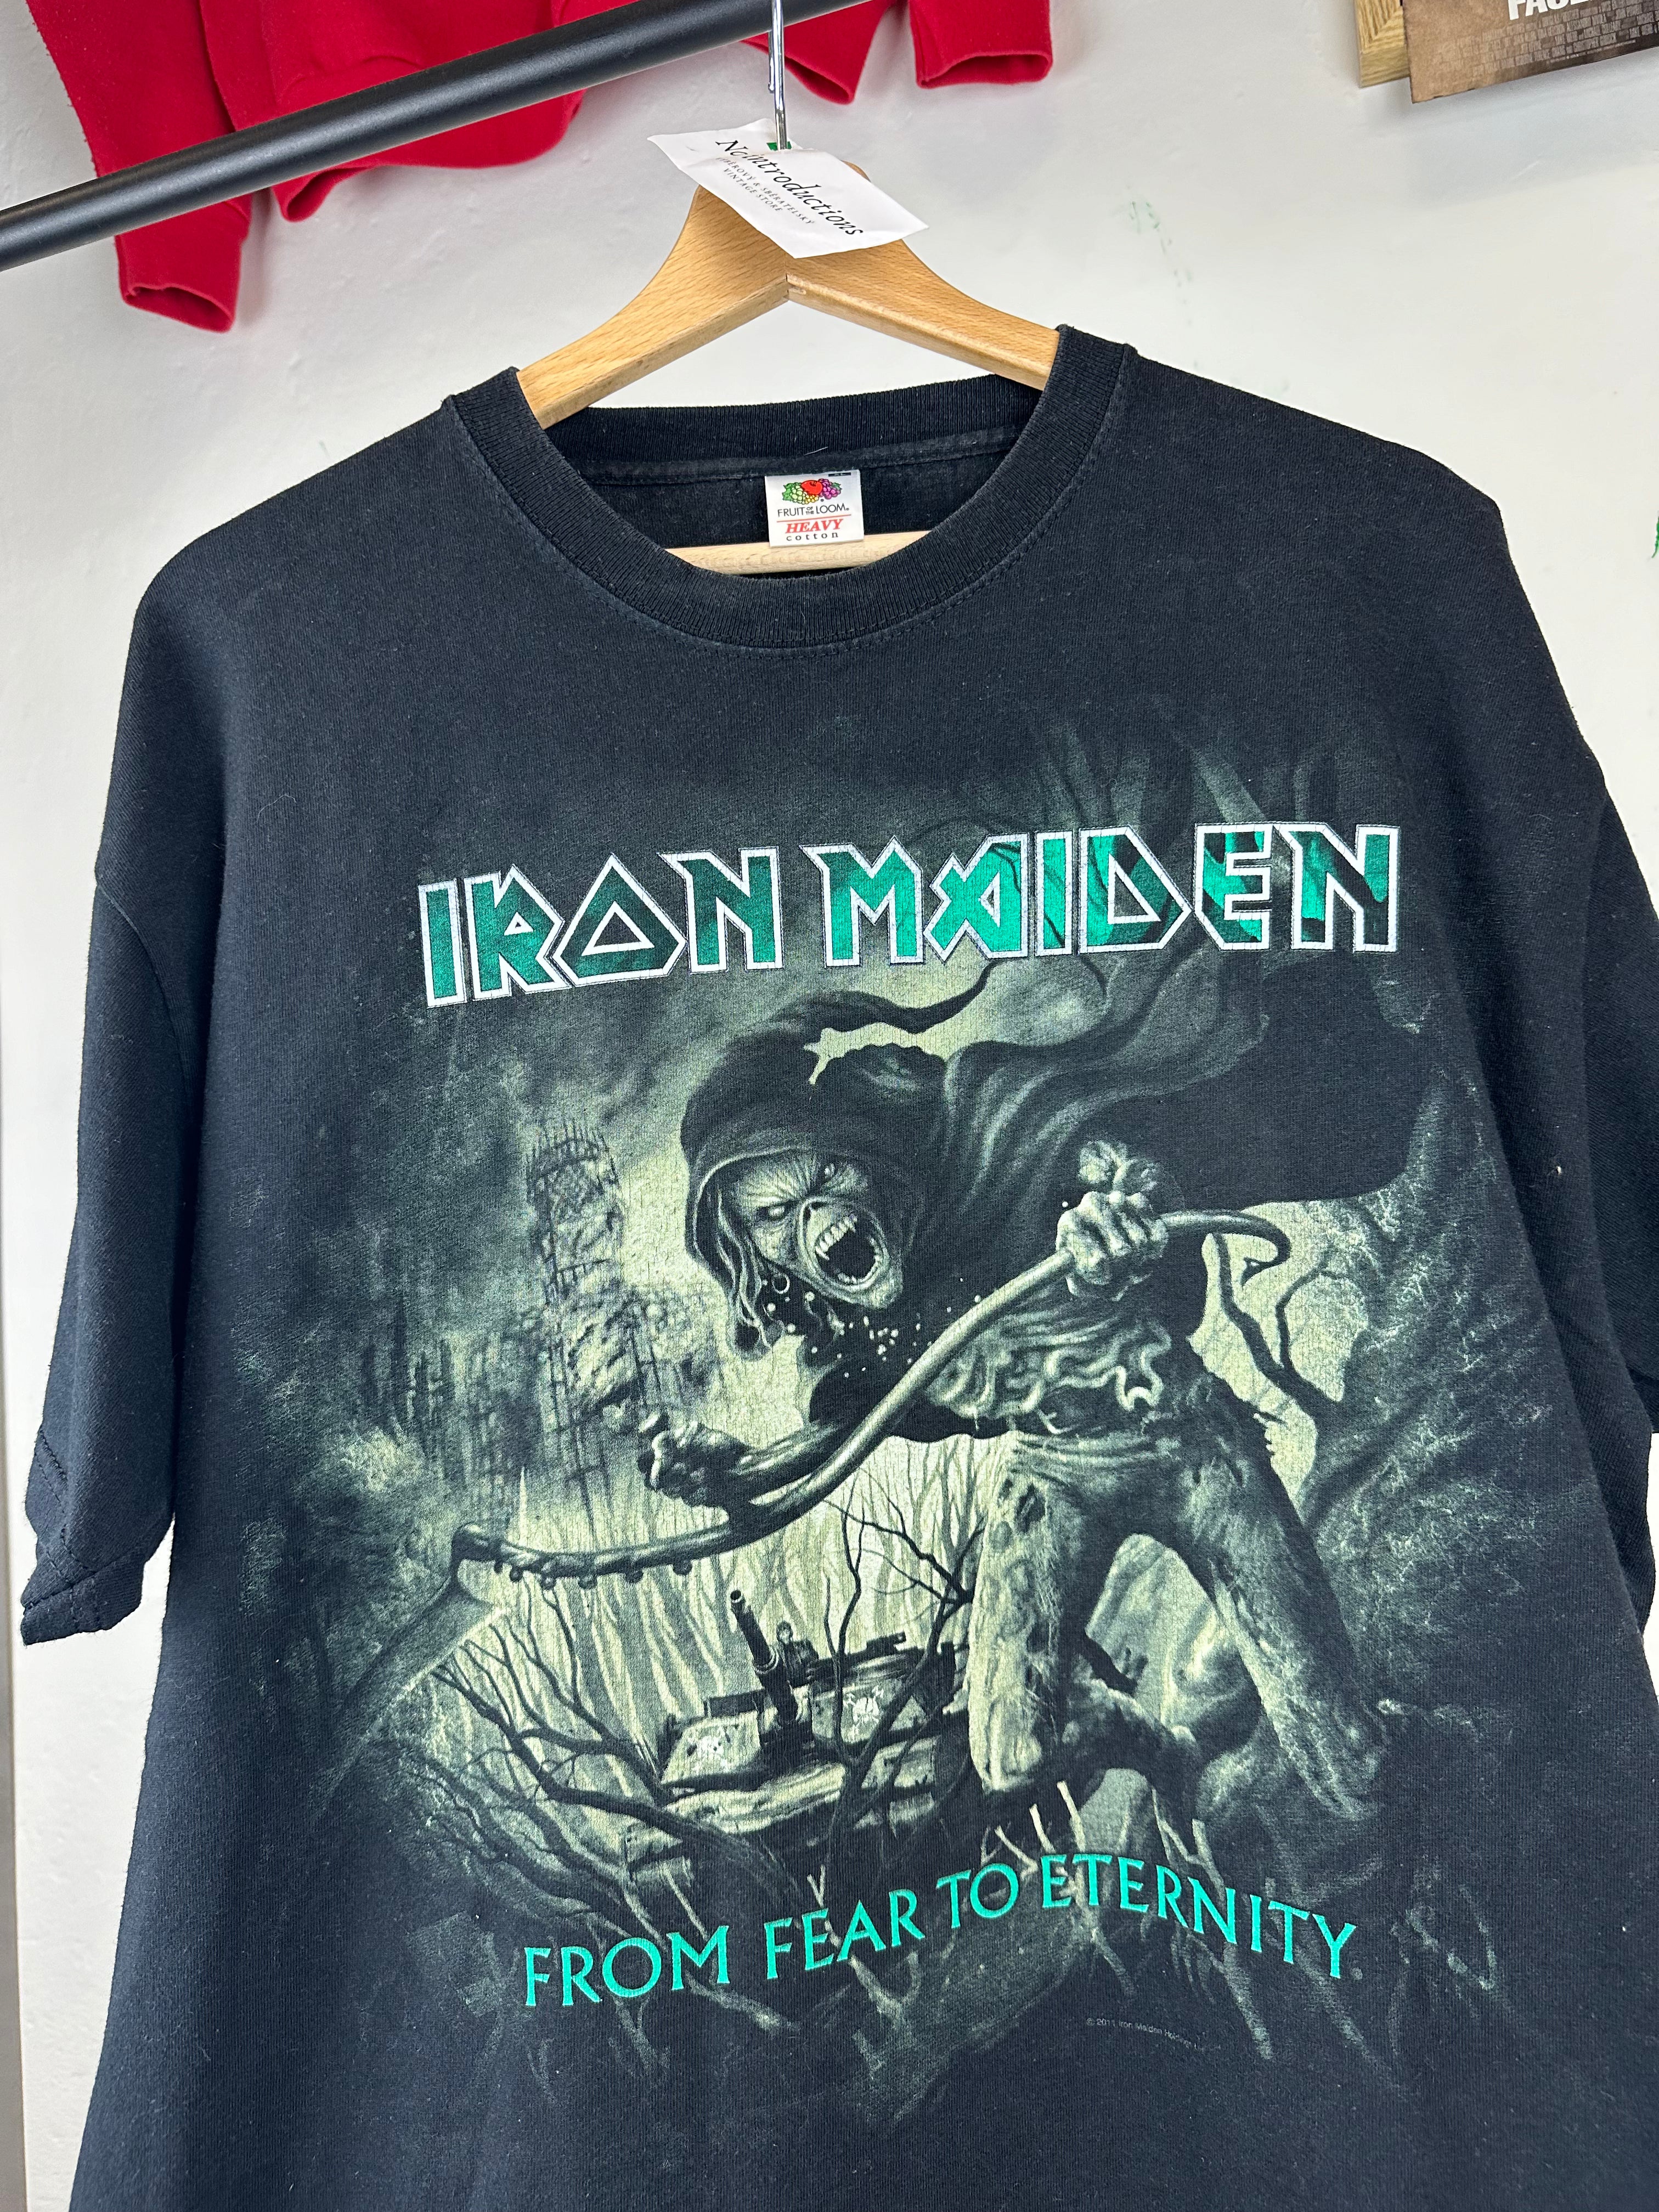 Vintage Iron Maiden "From Fear to Eternity" T-shirt - size XL